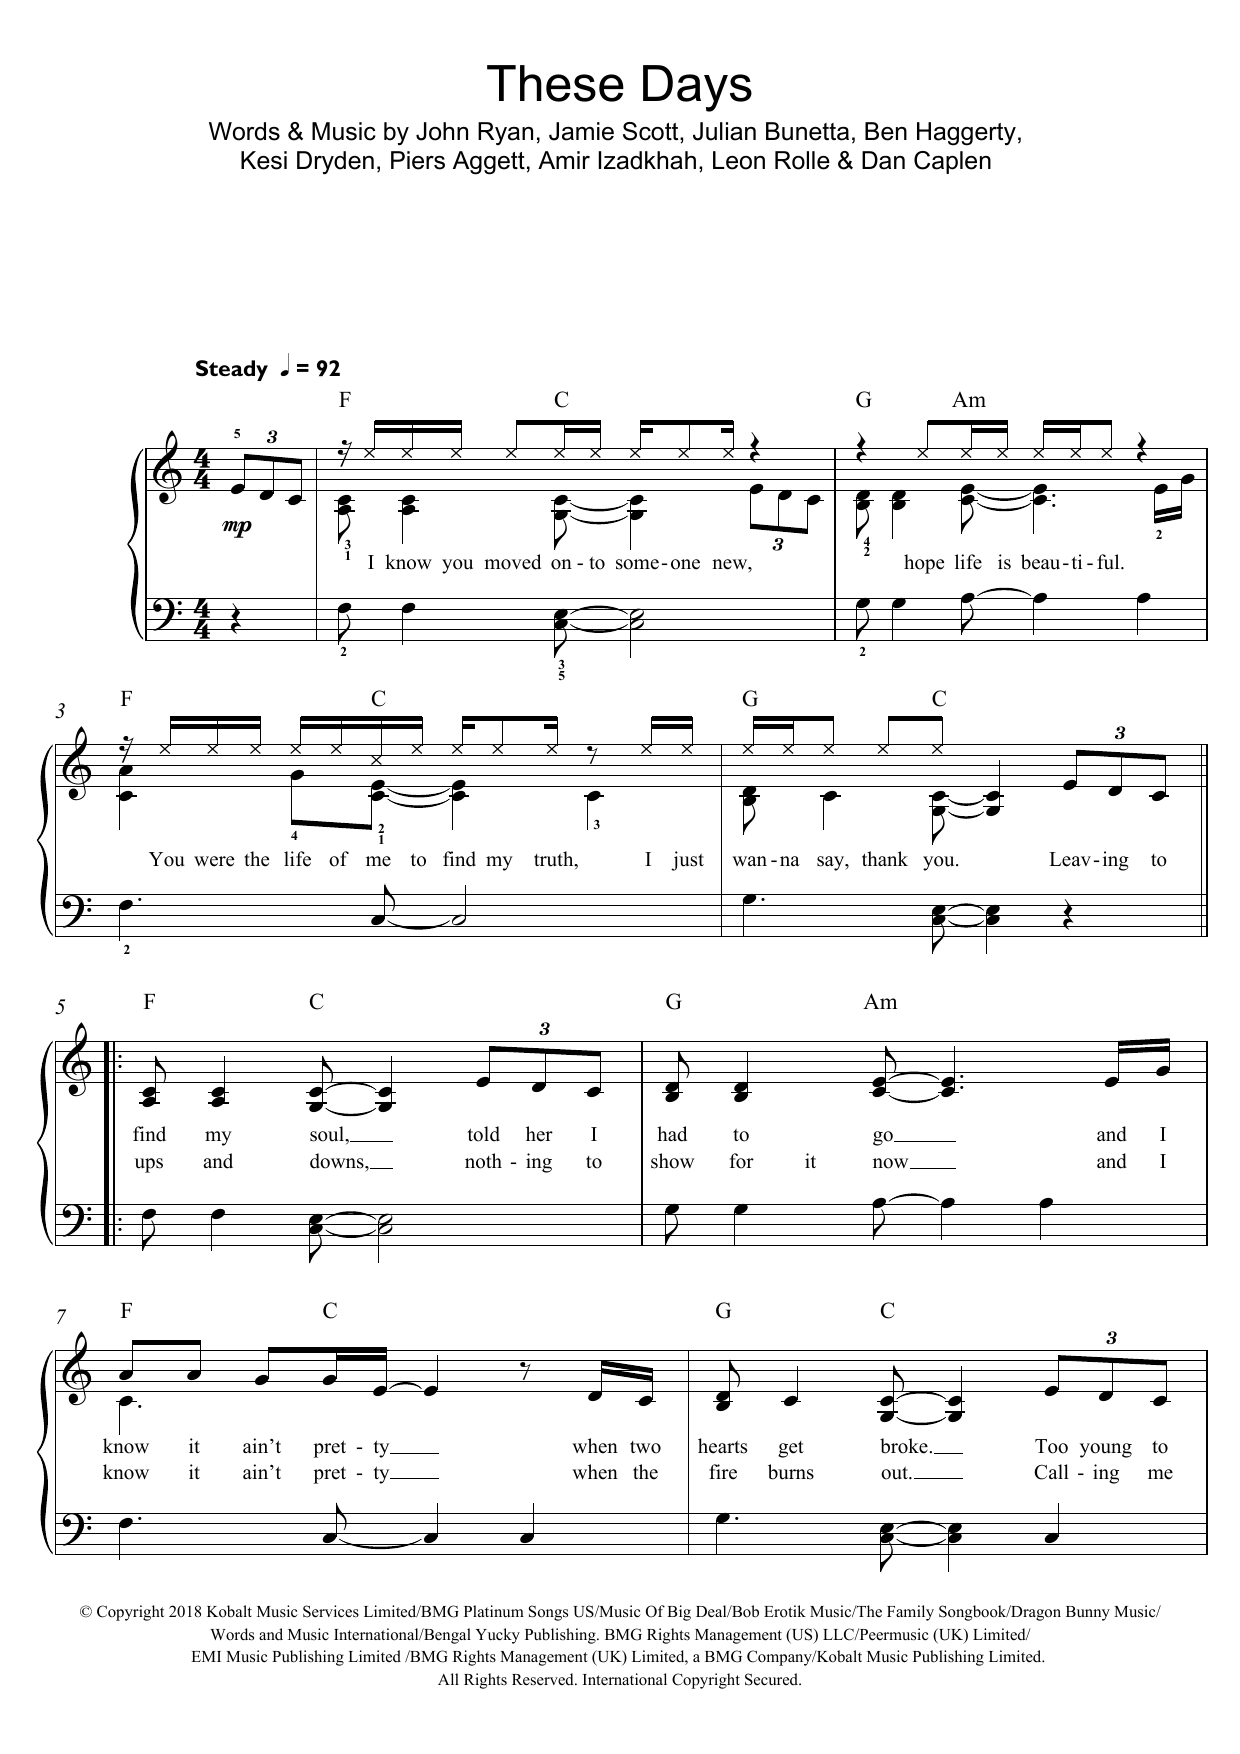 Download Rudimental These Days (featuring Jess Glynne, Mack Sheet Music